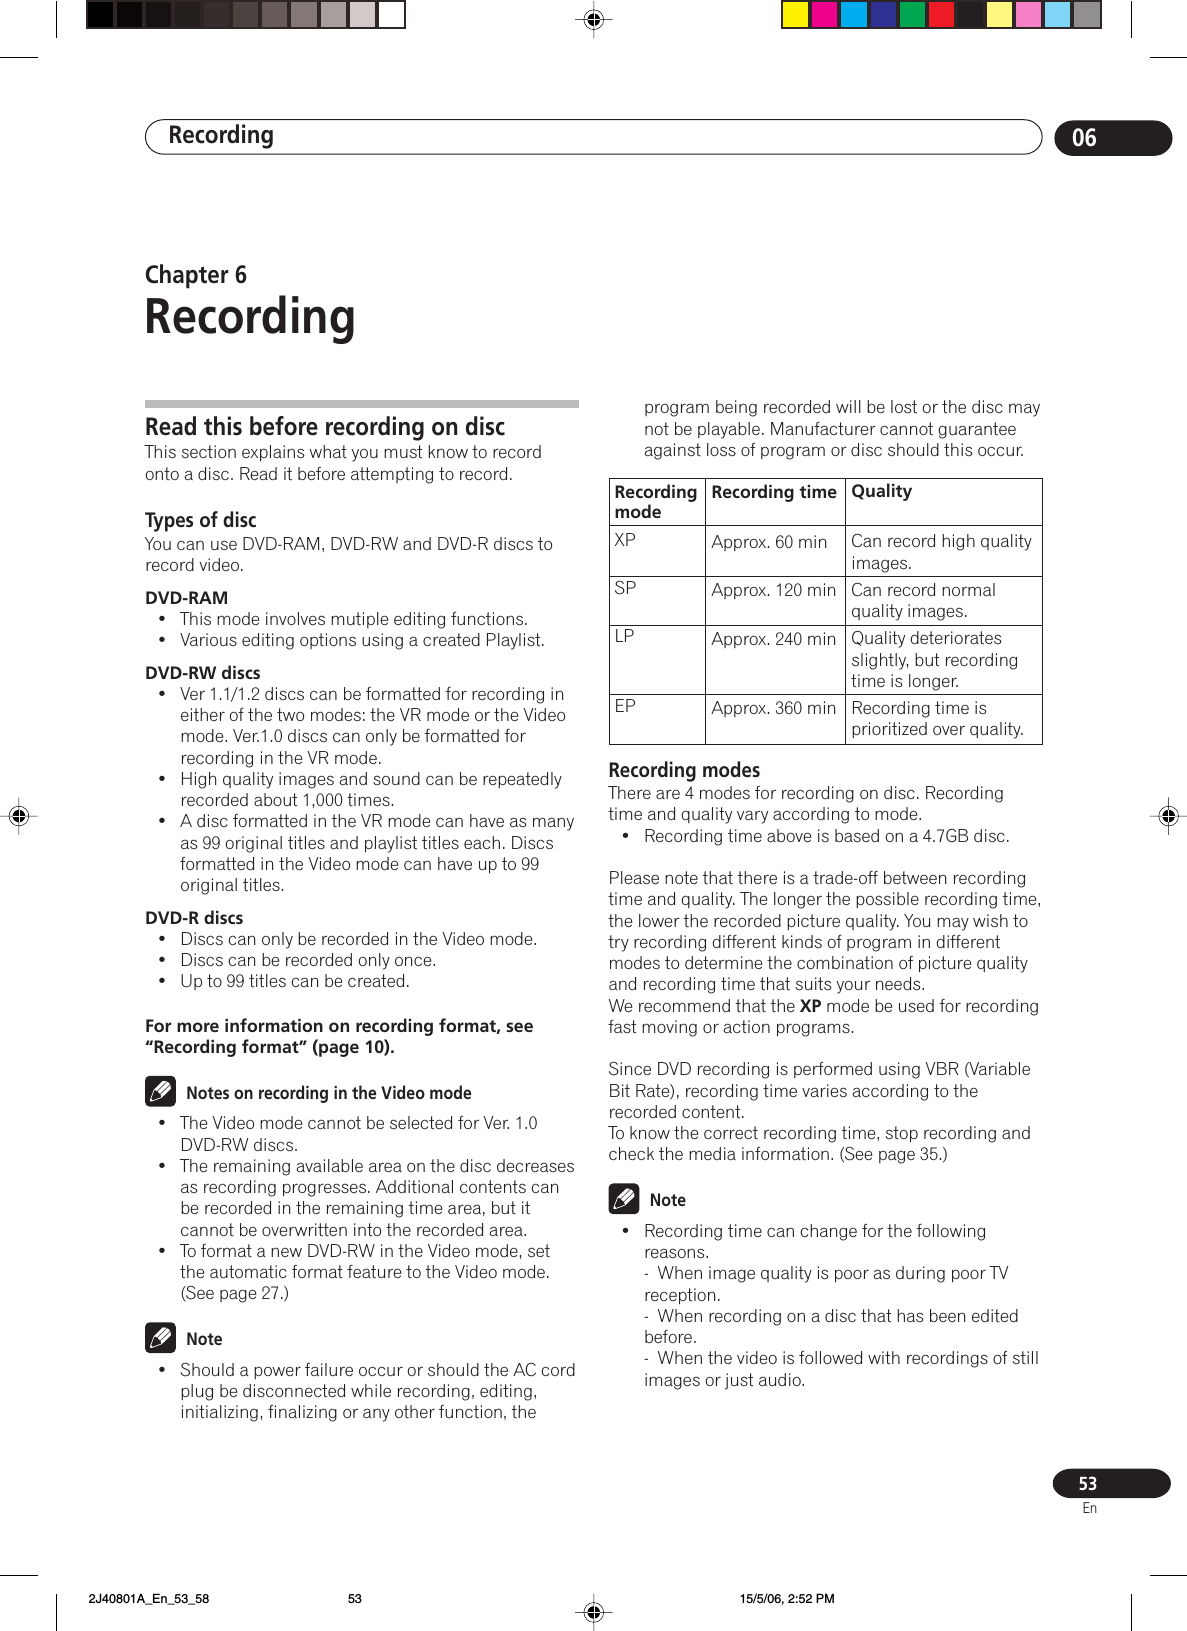 Recording 0653EnRead this before recording on discThis section explains what you must know to recordonto a disc. Read it before attempting to record.Types of discYou can use DVD-RAM, DVD-RW and DVD-R discs torecord video.DVD-RAM• This mode involves mutiple editing functions.•Various editing options using a created Playlist.DVD-RW discs•Ver 1.1/1.2 discs can be formatted for recording ineither of the two modes: the VR mode or the Videomode. Ver.1.0 discs can only be formatted forrecording in the VR mode.•High quality images and sound can be repeatedlyrecorded about 1,000 times.•A disc formatted in the VR mode can have as manyas 99 original titles and playlist titles each. Discsformatted in the Video mode can have up to 99original titles.DVD-R discs•Discs can only be recorded in the Video mode.•Discs can be recorded only once.• Up to 99 titles can be created.For more information on recording format, see“Recording format” (page 10).Notes on recording in the Video mode•The Video mode cannot be selected for Ver. 1.0DVD-RW discs.•The remaining available area on the disc decreasesas recording progresses. Additional contents canbe recorded in the remaining time area, but itcannot be overwritten into the recorded area.•To format a new DVD-RW in the Video mode, setthe automatic format feature to the Video mode.(See page 27.)Note•Should a power failure occur or should the AC cordplug be disconnected while recording, editing,initializing, finalizing or any other function, theChapter 6RecordingRecordingmodeXPSPLPEPRecording timeApprox. 60 minApprox. 120 minApprox. 240 minApprox. 360 minQualityCan record high qualityimages.Can record normalquality images.Quality deterioratesslightly, but recordingtime is longer.Recording time isprioritized over quality.program being recorded will be lost or the disc maynot be playable. Manufacturer cannot guaranteeagainst loss of program or disc should this occur.Recording modesThere are 4 modes for recording on disc. Recordingtime and quality vary according to mode.•Recording time above is based on a 4.7GB disc.Please note that there is a trade-off between recordingtime and quality. The longer the possible recording time,the lower the recorded picture quality. You may wish totry recording different kinds of program in differentmodes to determine the combination of picture qualityand recording time that suits your needs.We recommend that the XP mode be used for recordingfast moving or action programs.Since DVD recording is performed using VBR (VariableBit Rate), recording time varies according to therecorded content.To know the correct recording time, stop recording andcheck the media information. (See page 35.)Note•Recording time can change for the followingreasons.-  When image quality is poor as during poor TVreception.-  When recording on a disc that has been editedbefore.-  When the video is followed with recordings of stillimages or just audio. 2J40801A_En_53_58 15/5/06, 2:52 PM53